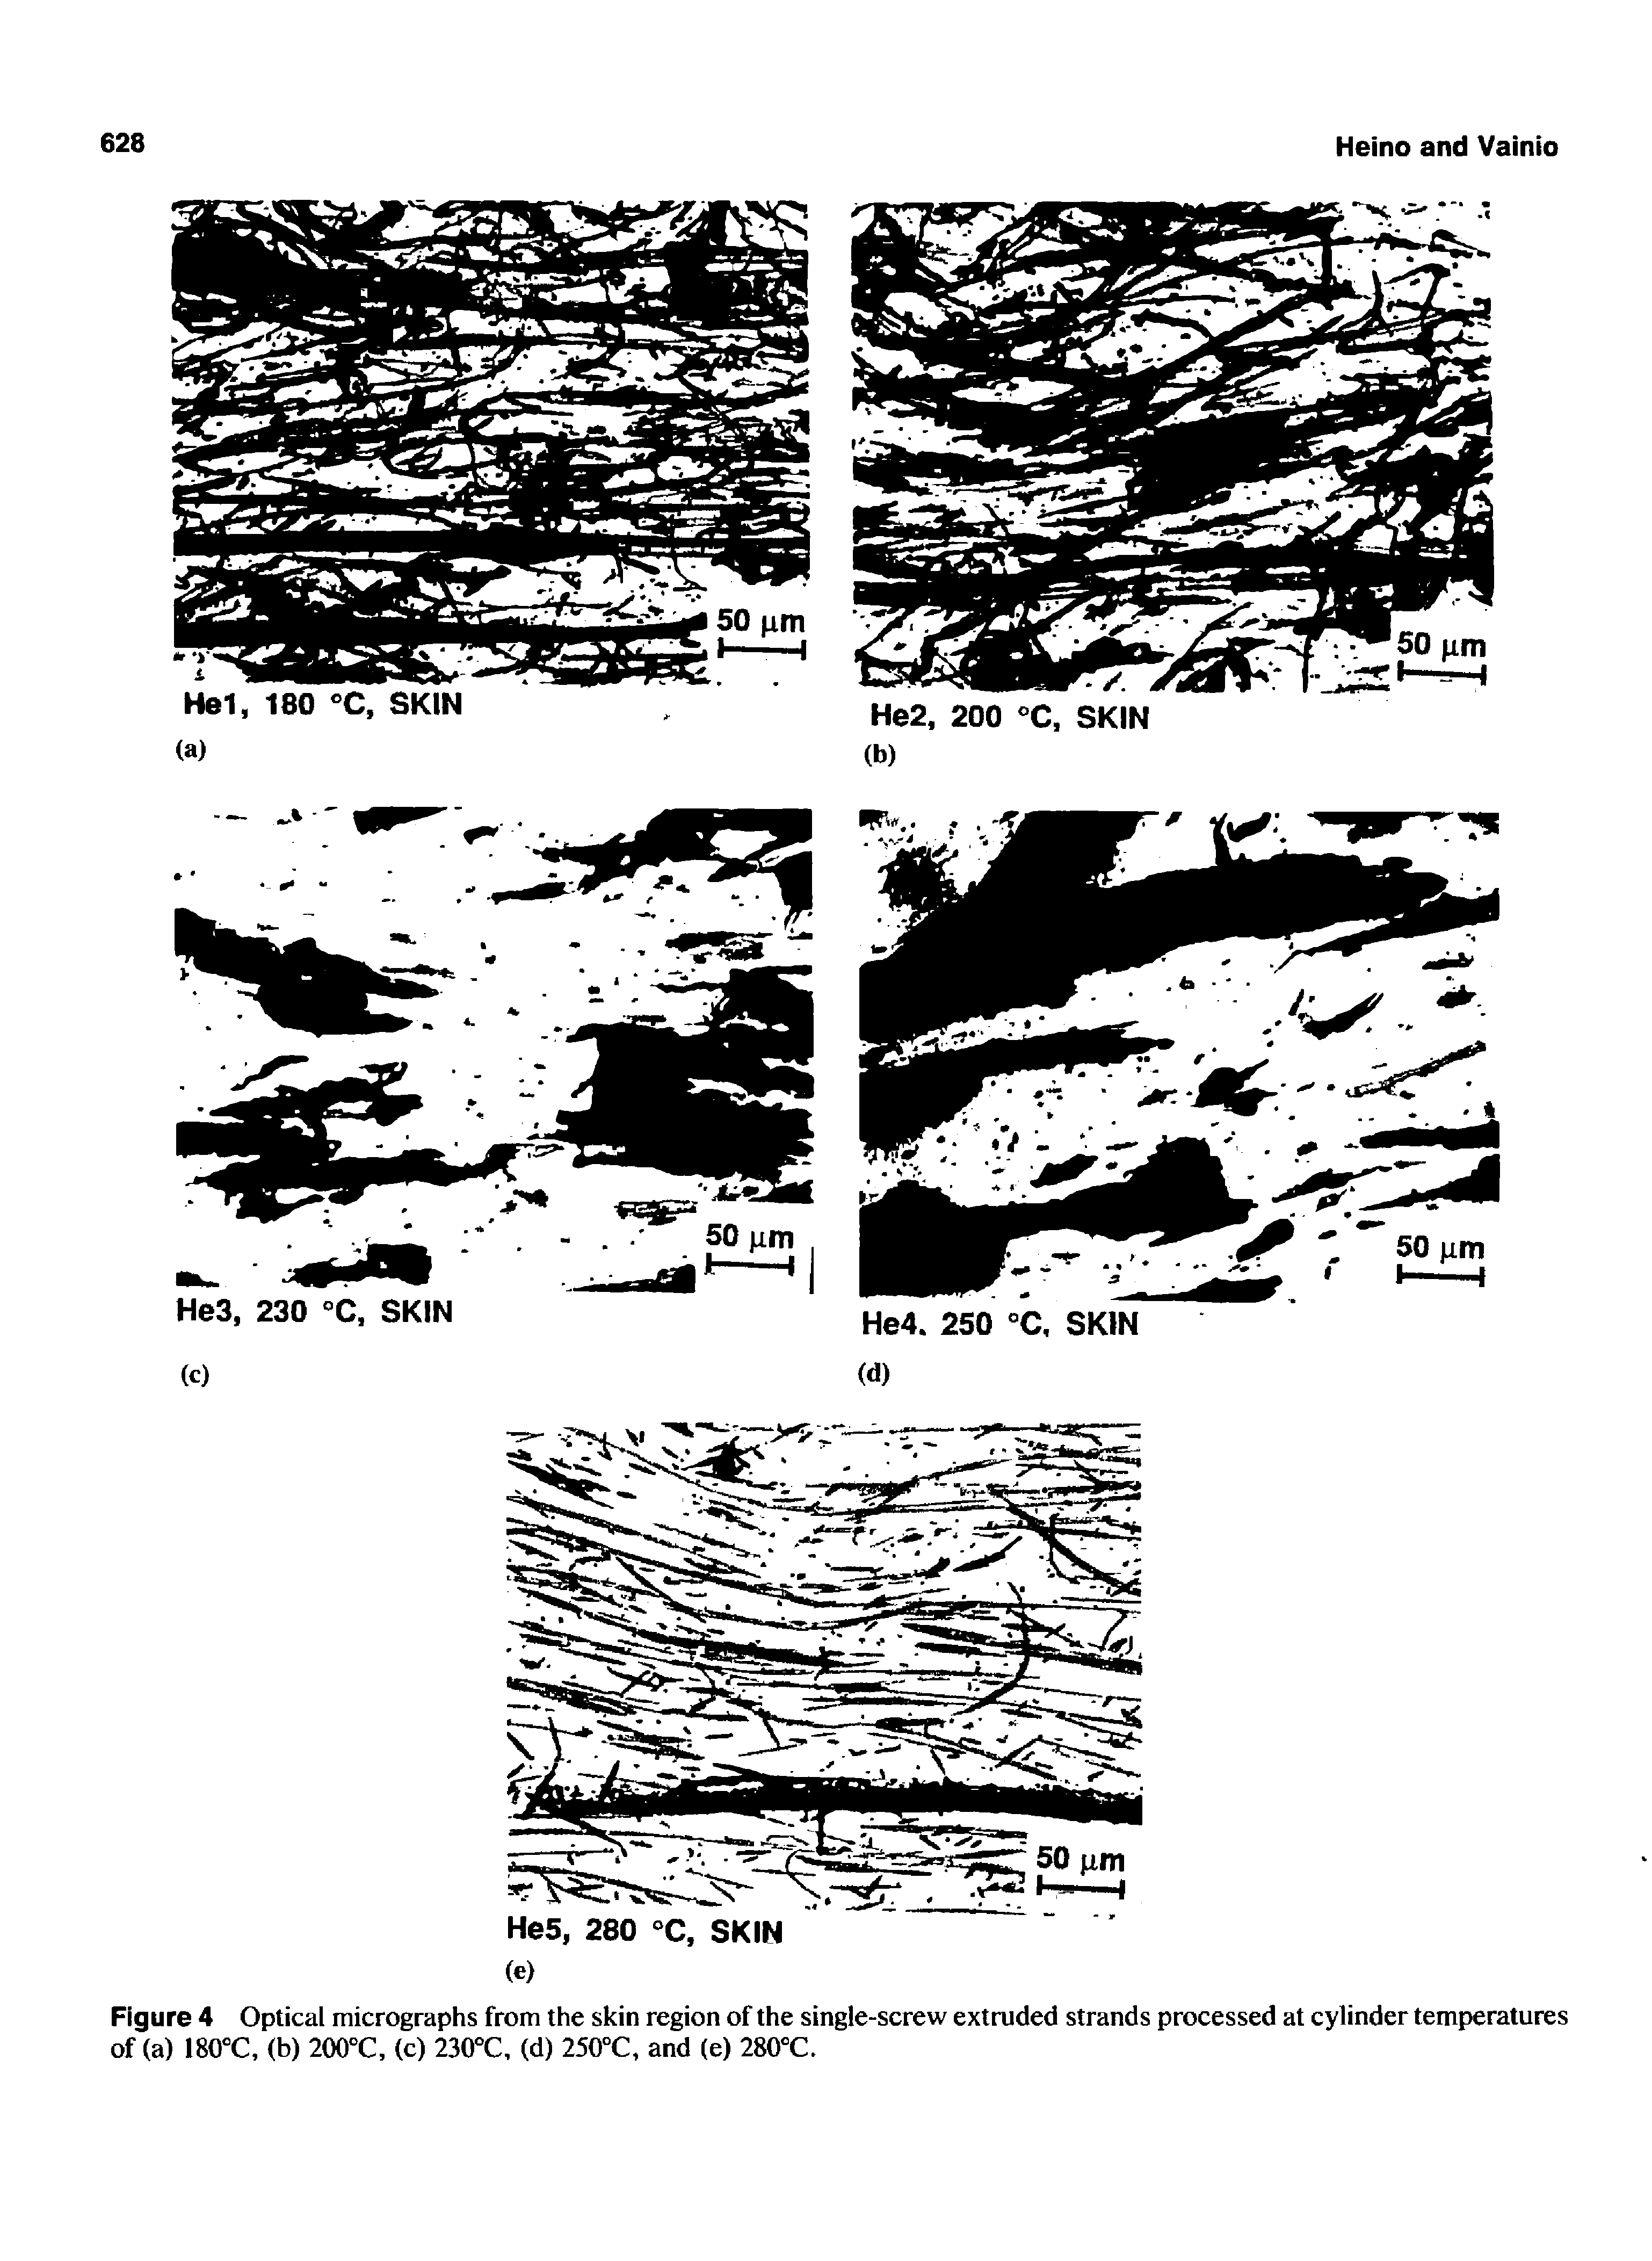 Figure 4 Optical micrographs from the skin region of the single-screw extruded strands processed at cylinder temperatures of (a) ISO C, (b) 200°C, (c) 230°C, (d) 250°C, and (e) 280°C.